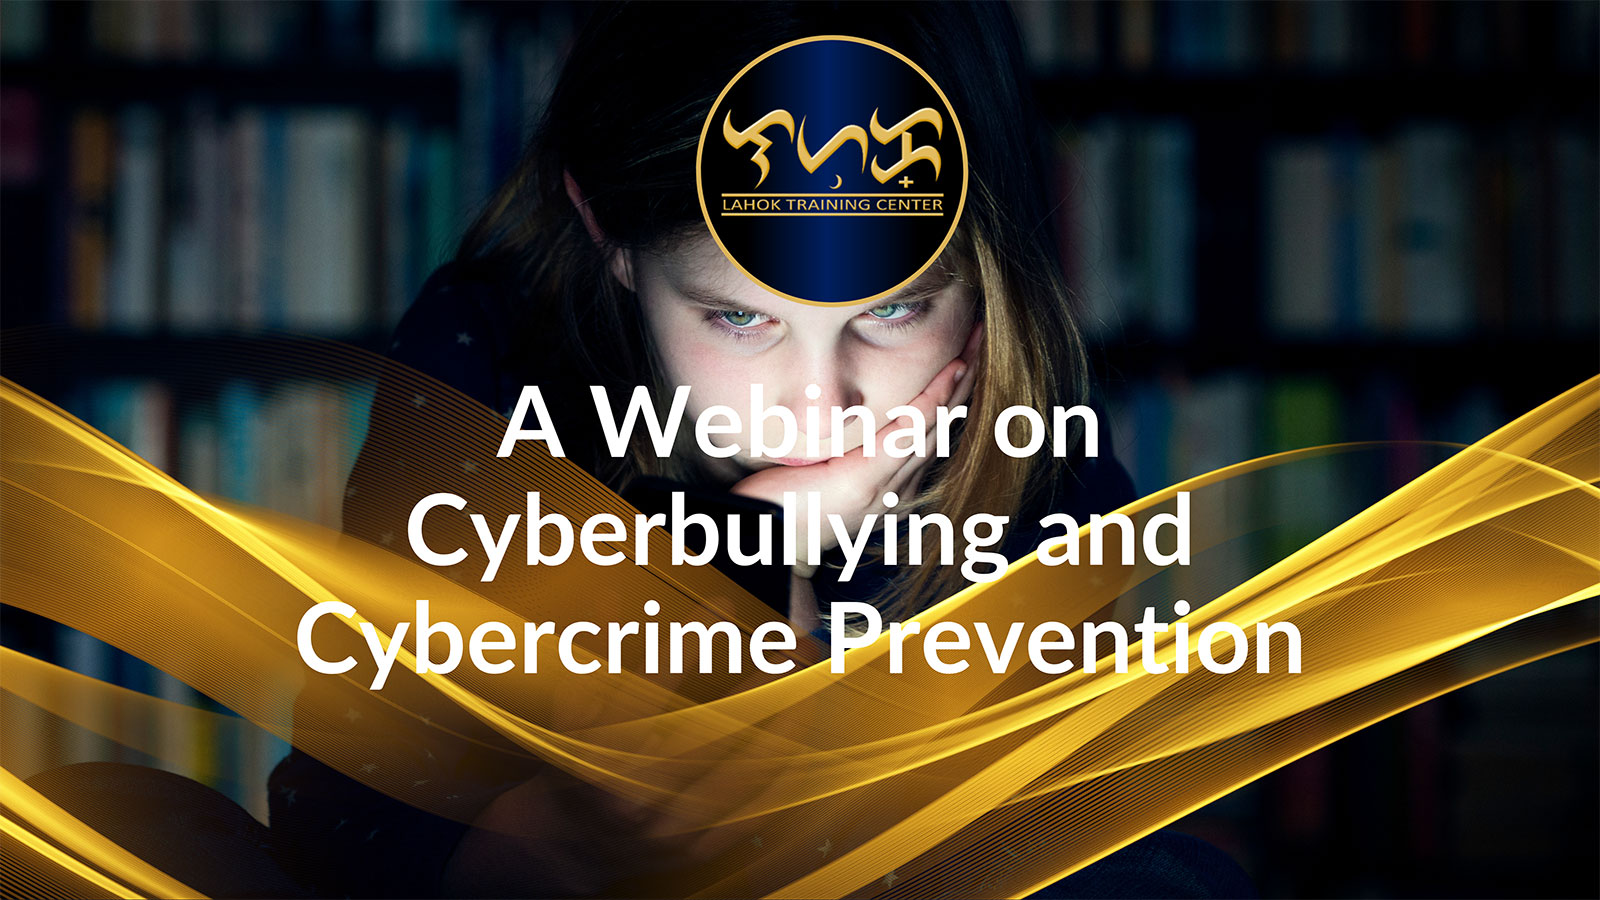 COURSE 2: Cyberbullying and Cybercrime Prevention